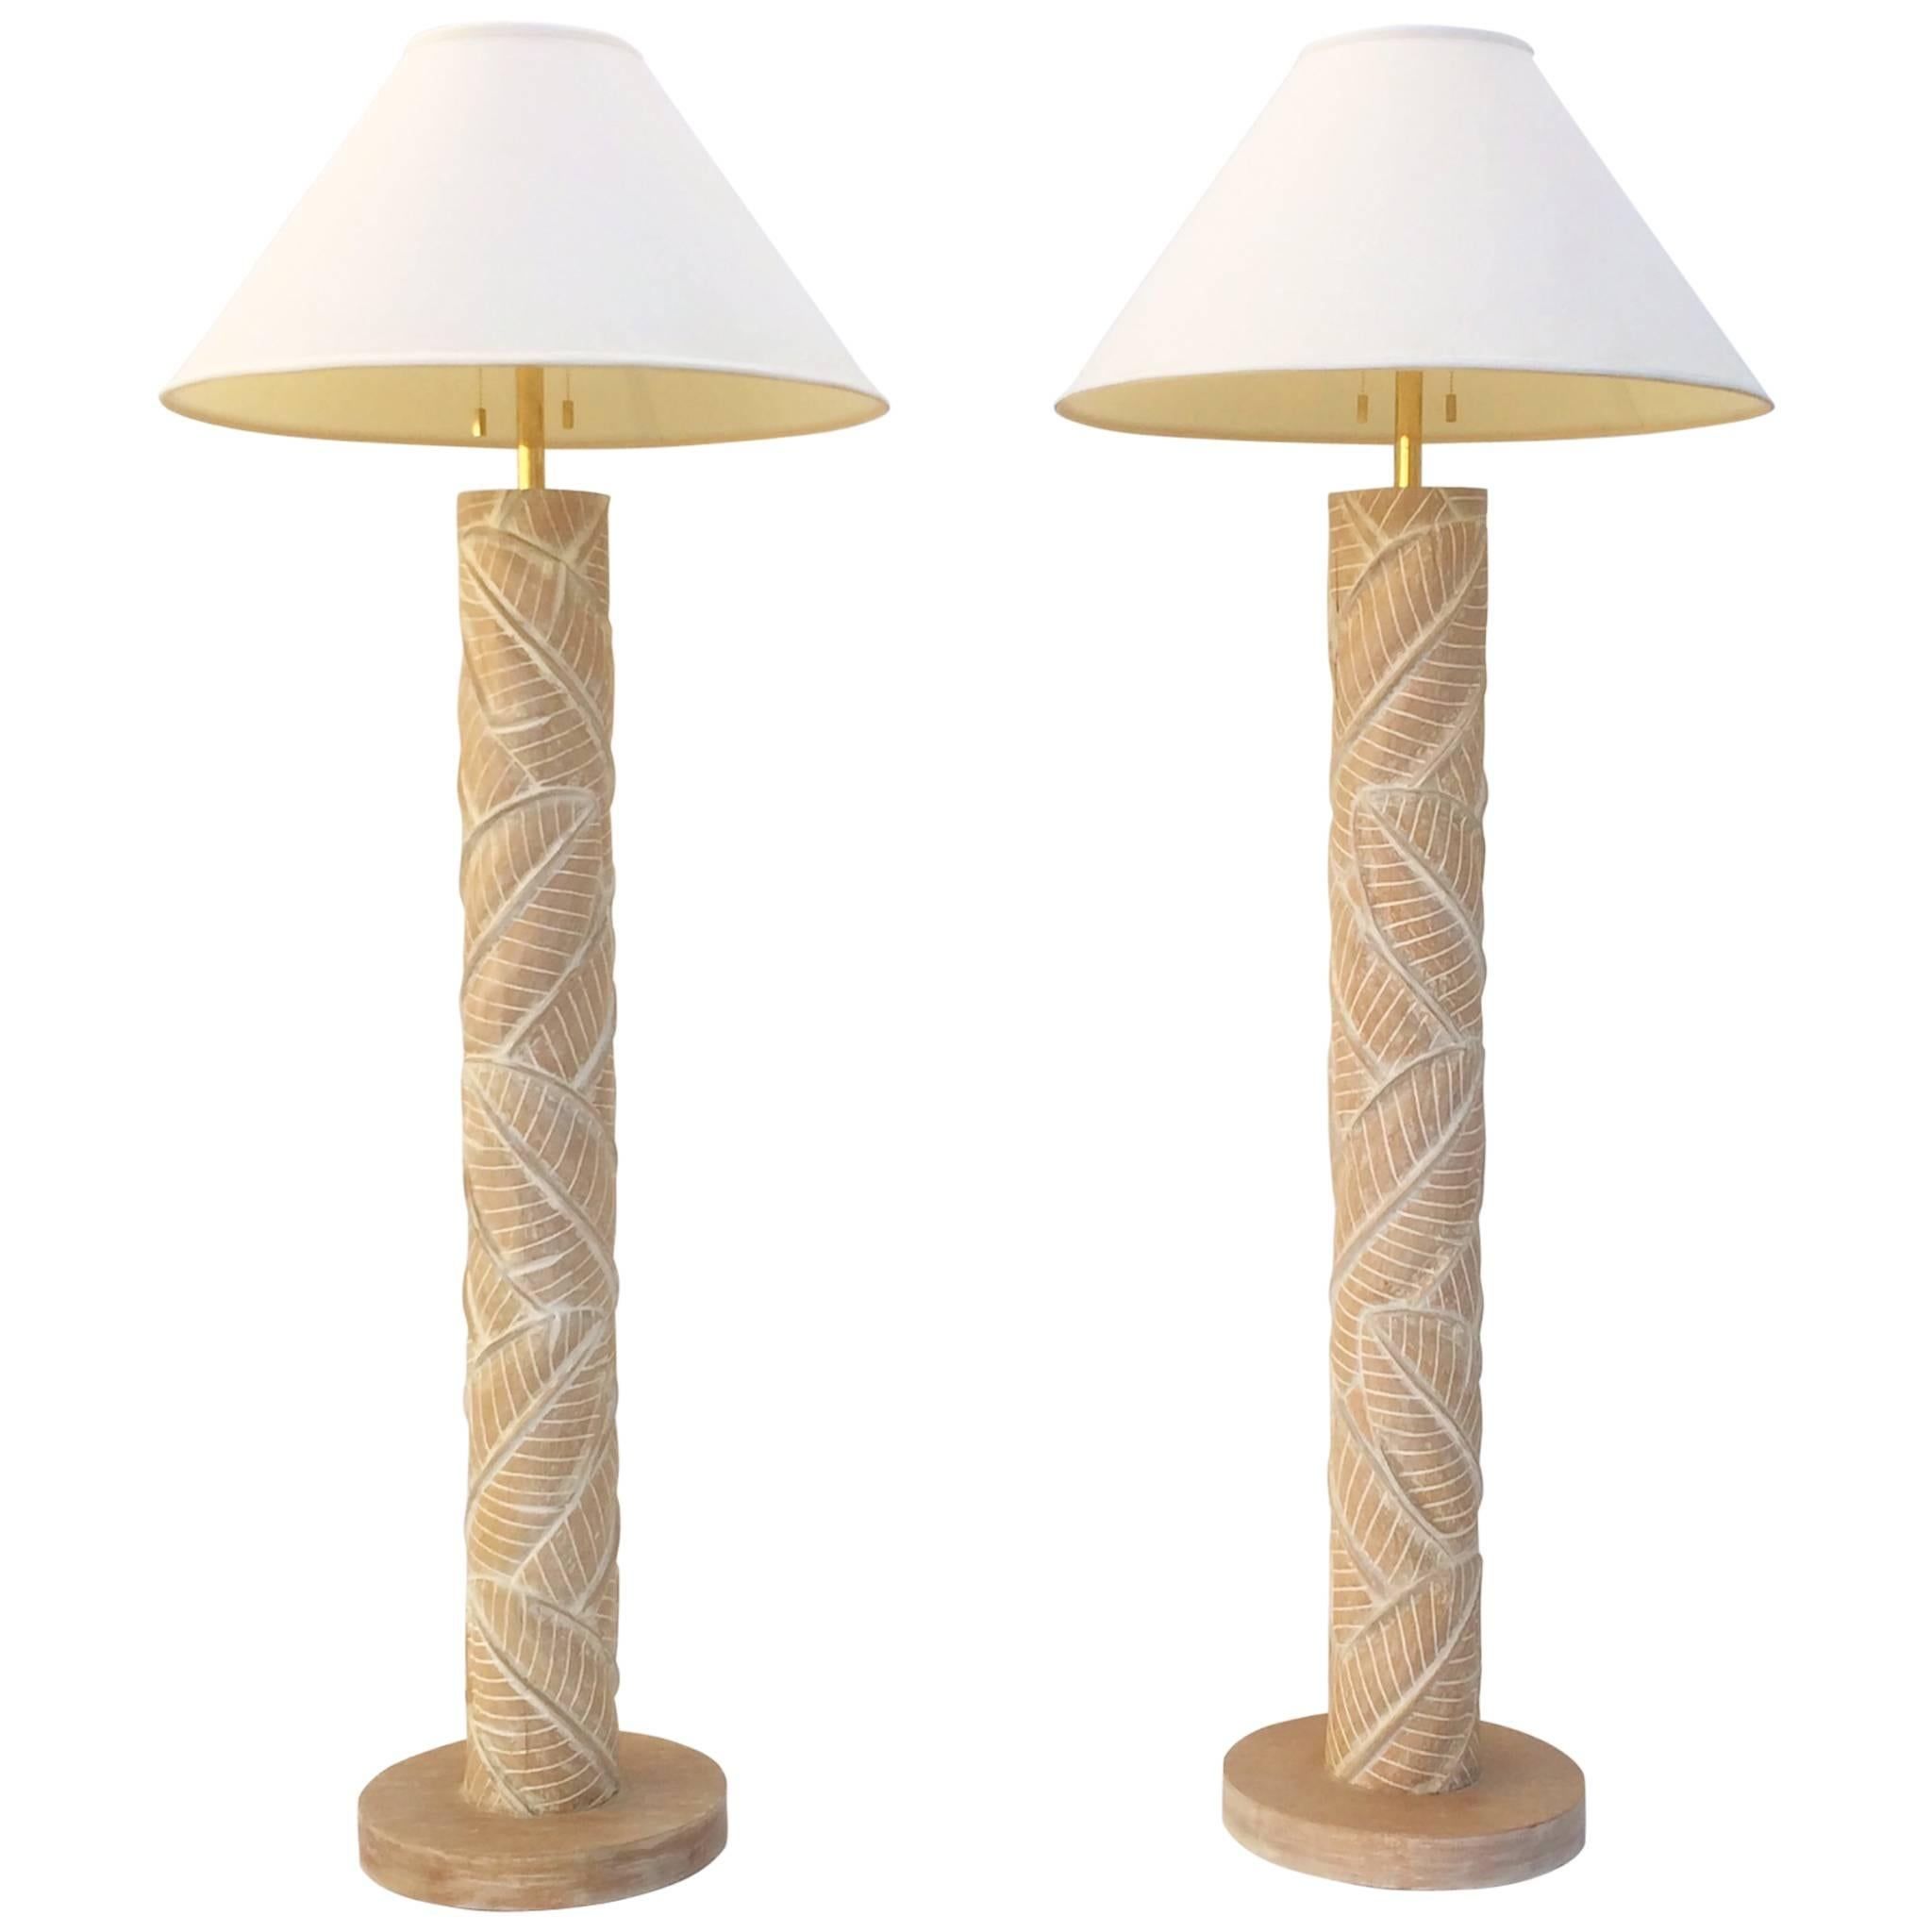 Pair Of Carved Wood Floor Lamps For Sale At 1stdibs For Carved Pattern Floor Lamps (View 4 of 15)